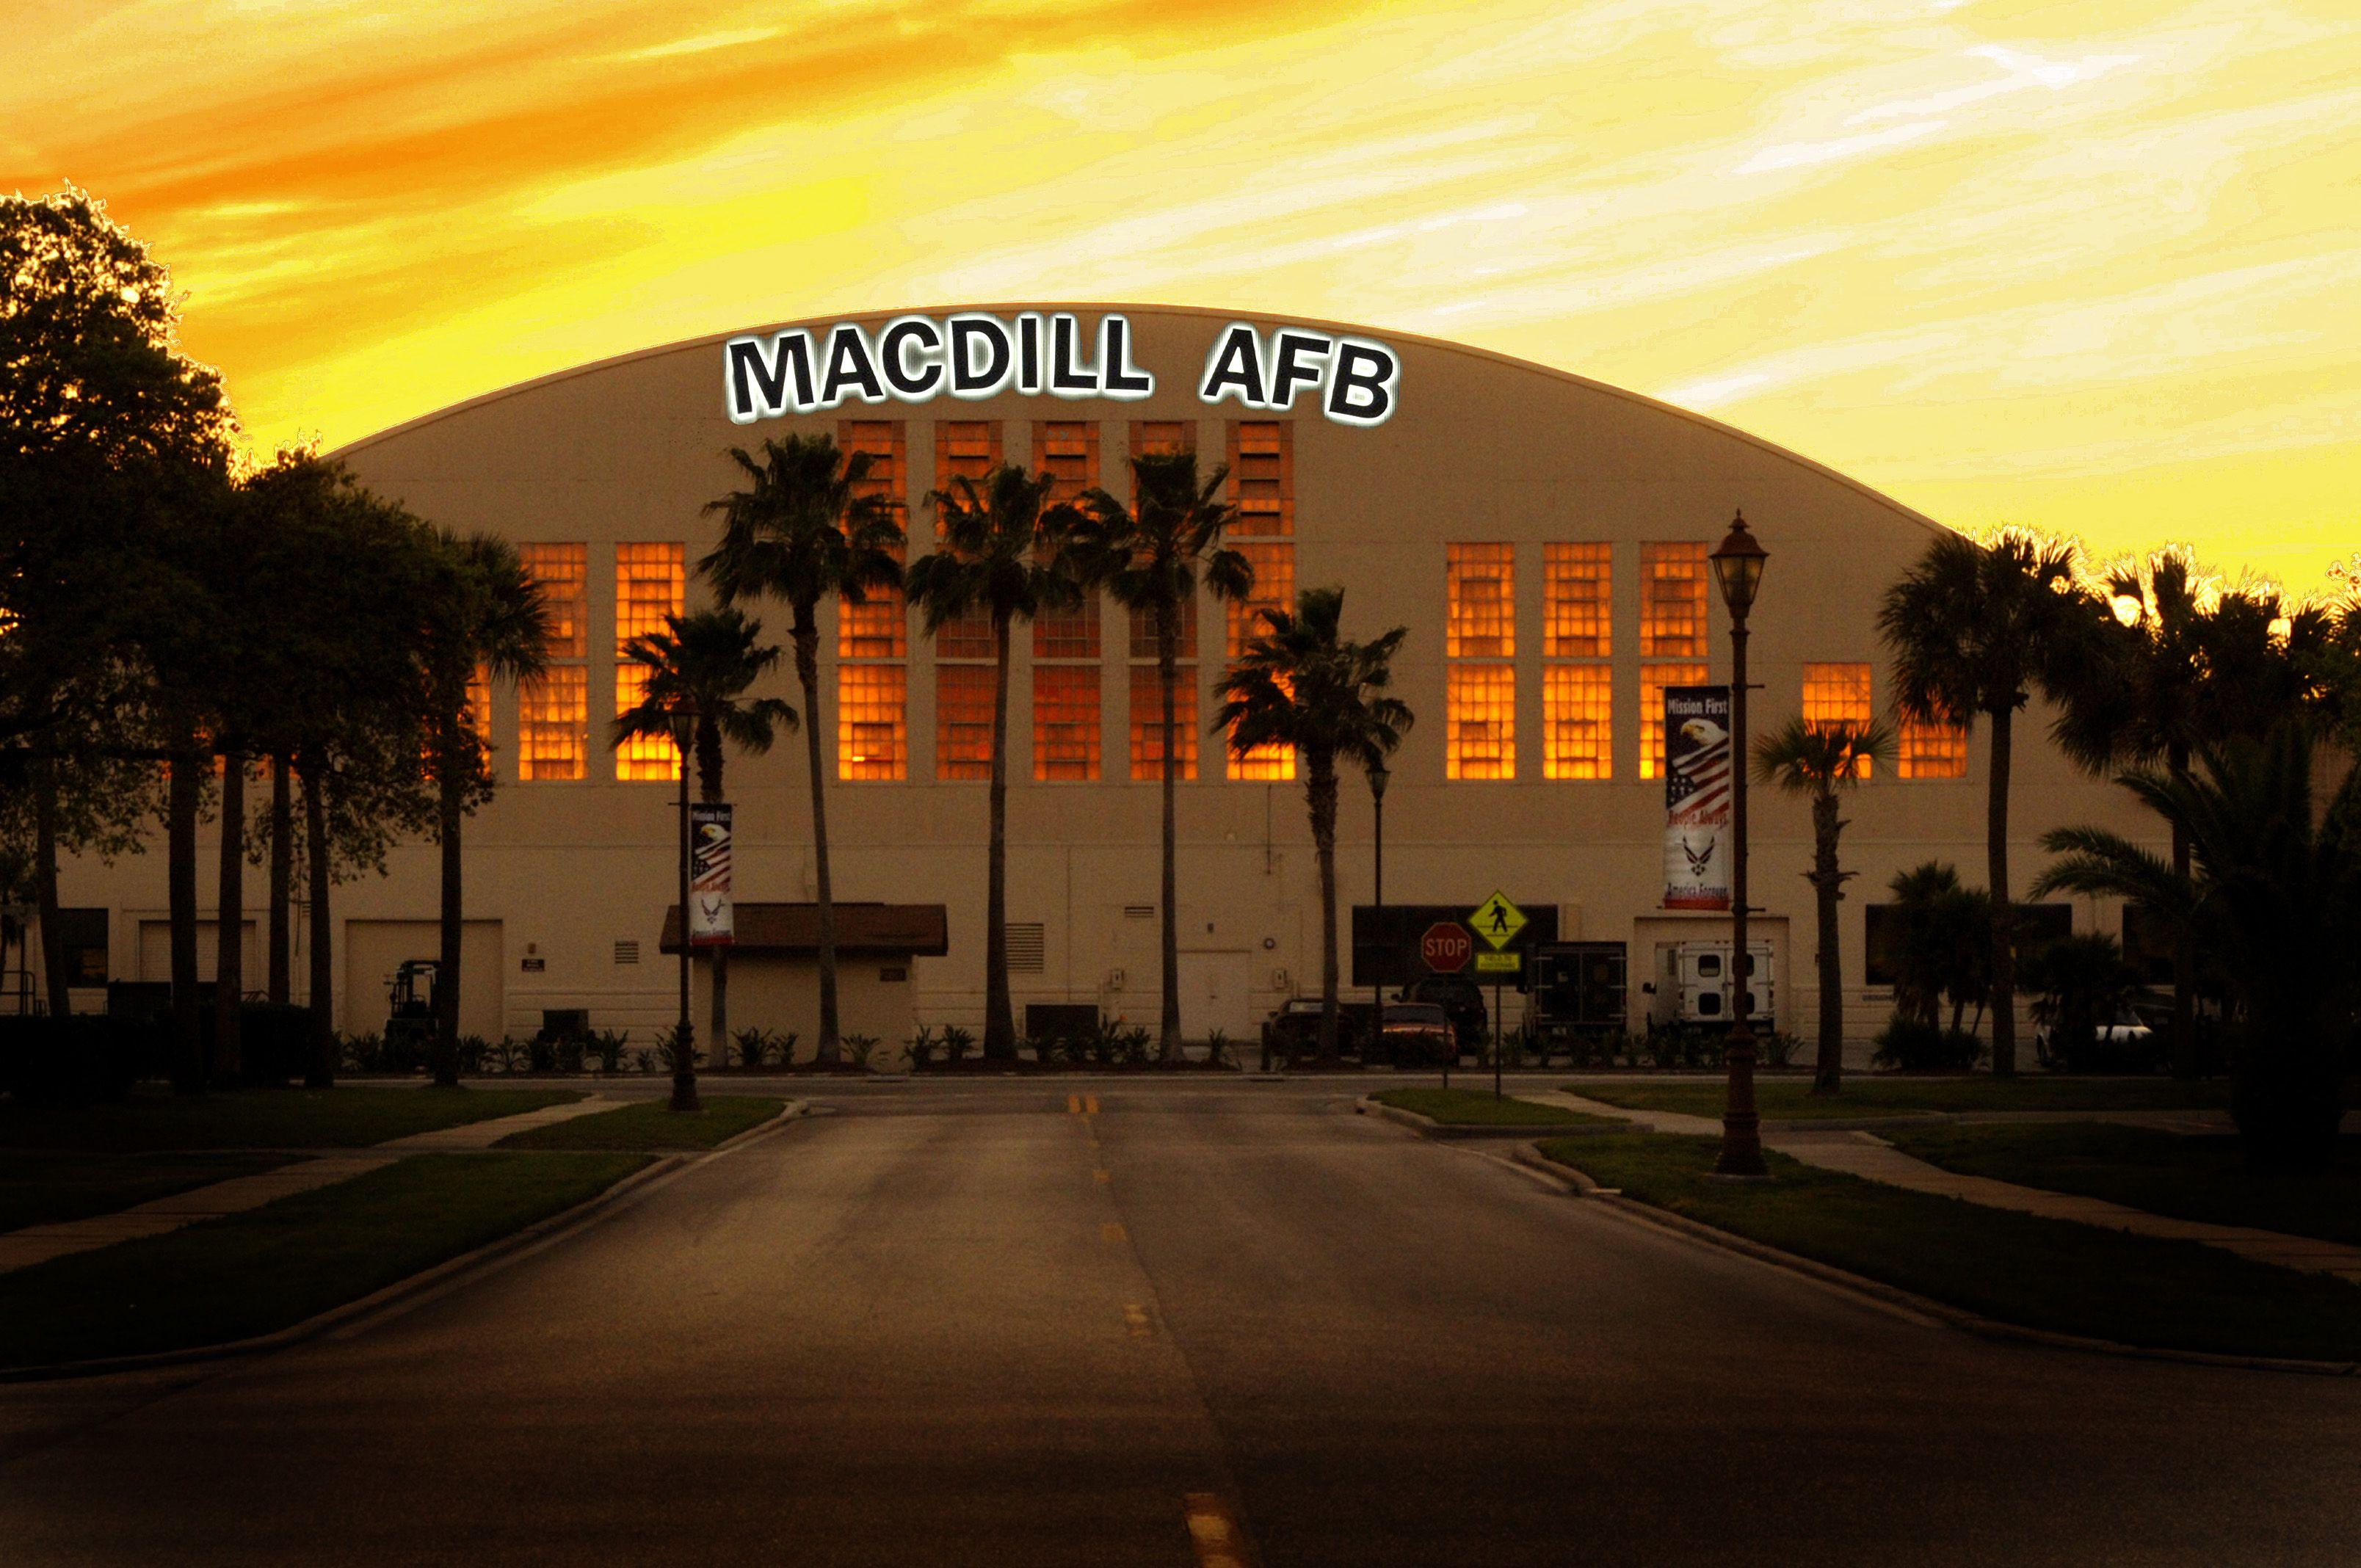 MacDill Air Force Base Logo - What do you know about MacDill? > MacDill Air Force Base > Display